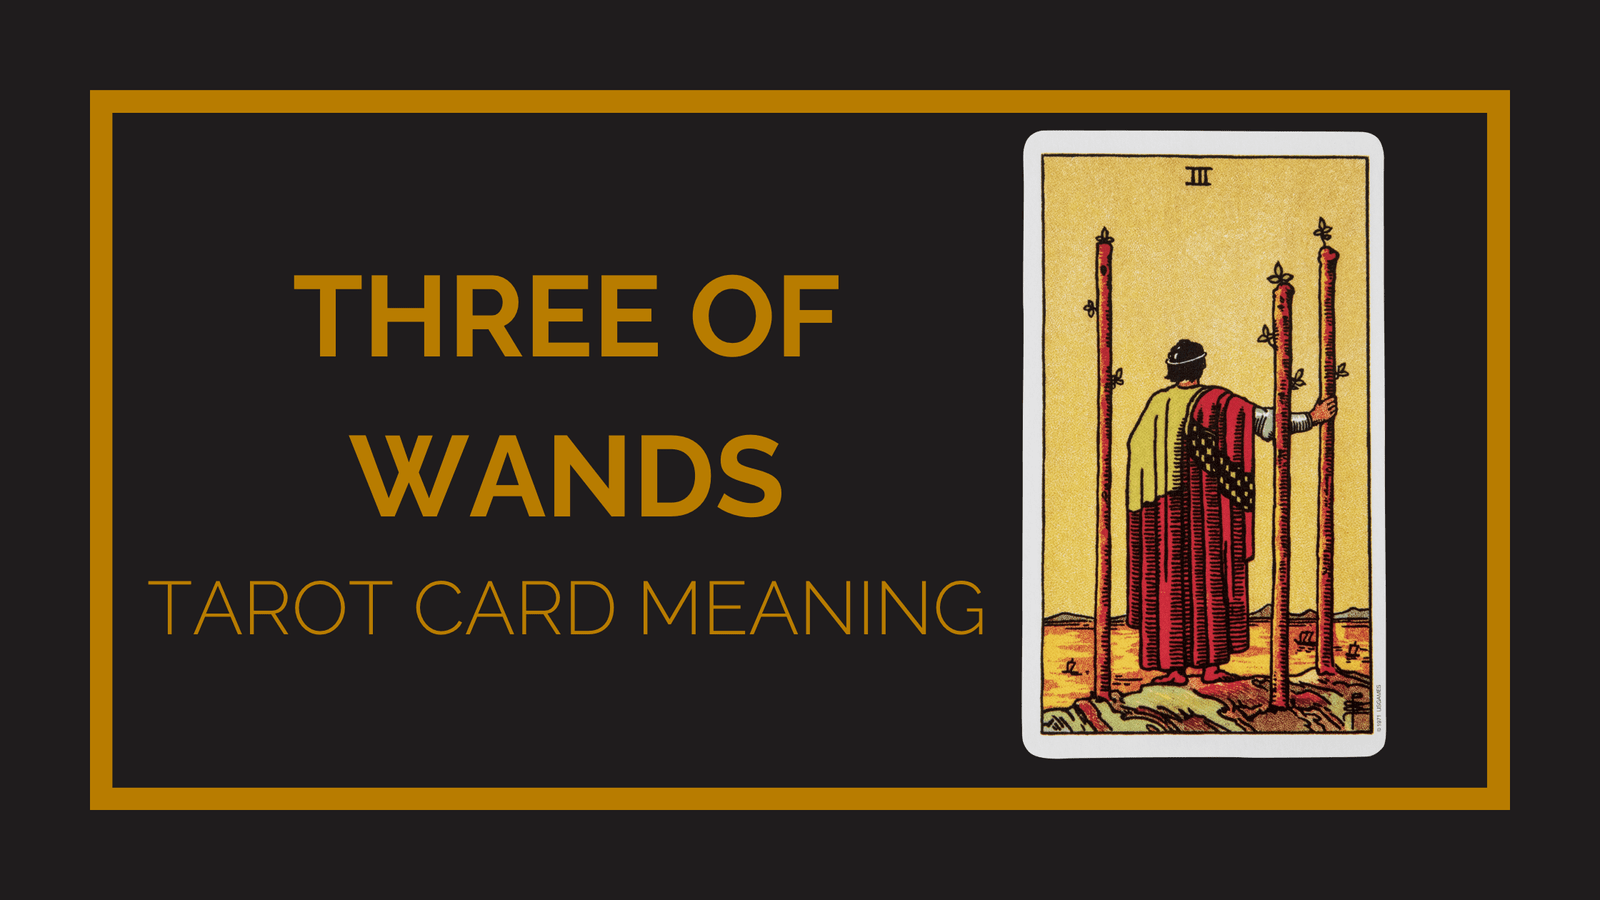 Three of wands tarot card meaning | tarot with gord